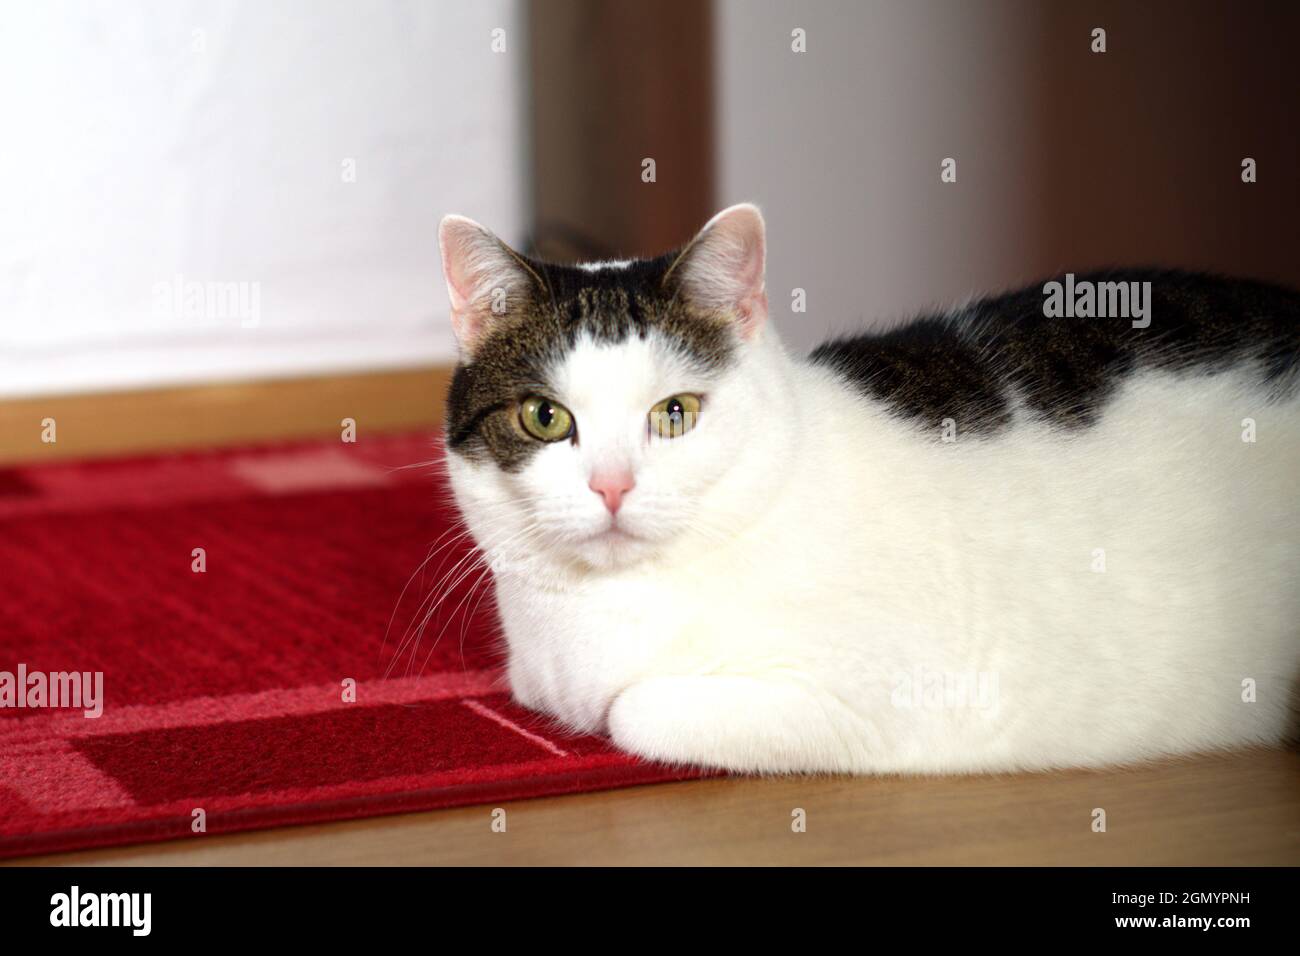 A cat lies relaxed on a carpet and looks into the camera Stock Photo